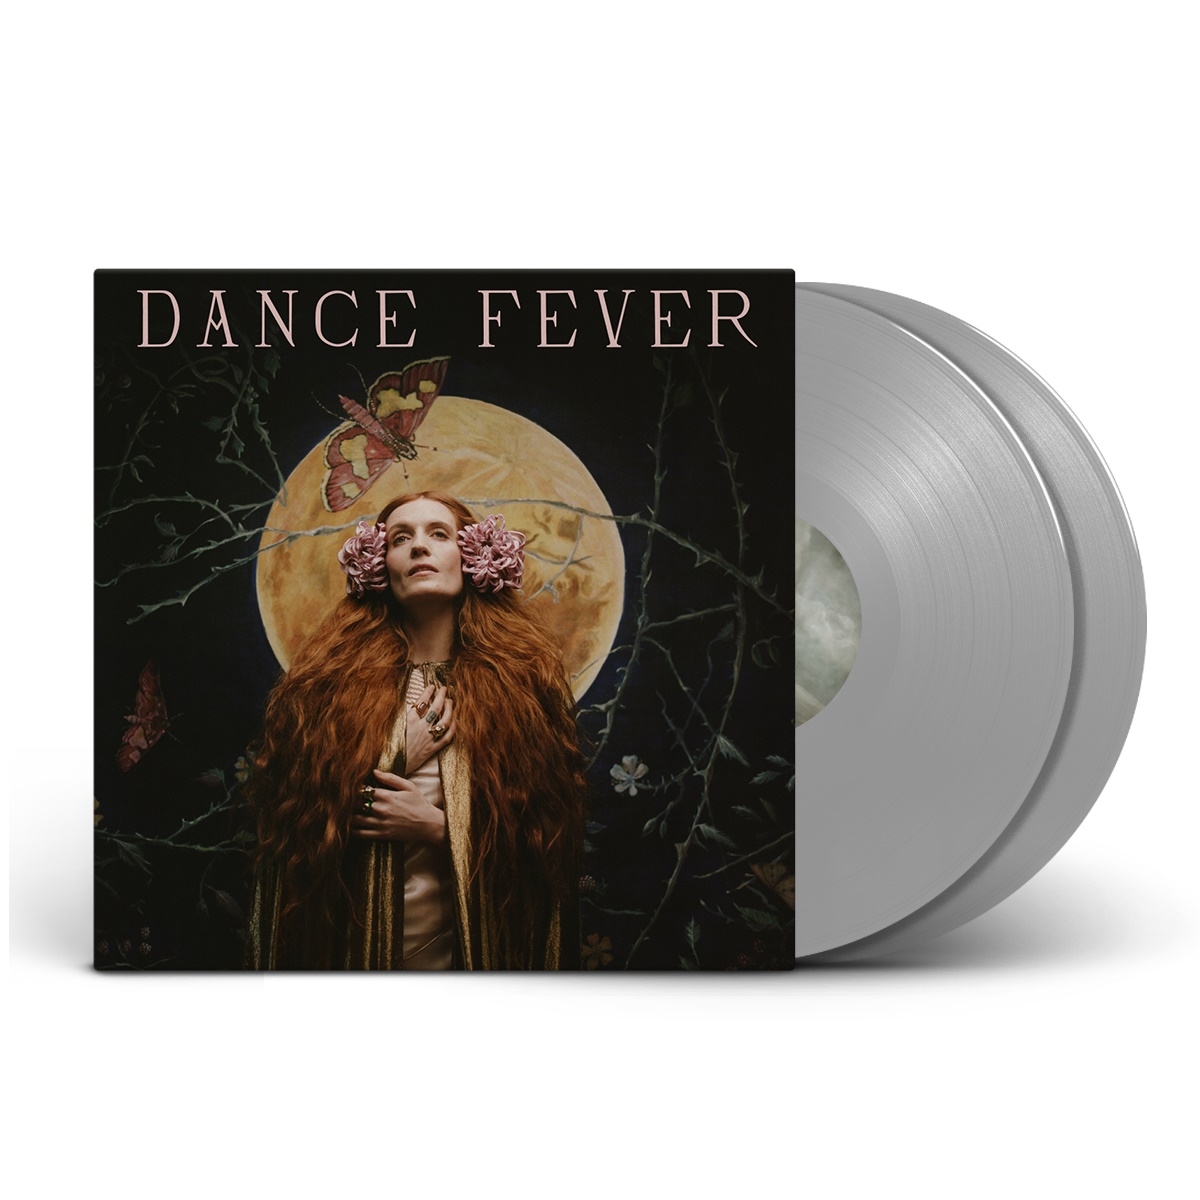 Florence And The Machine - Dance Fever (Grey Vinyl)